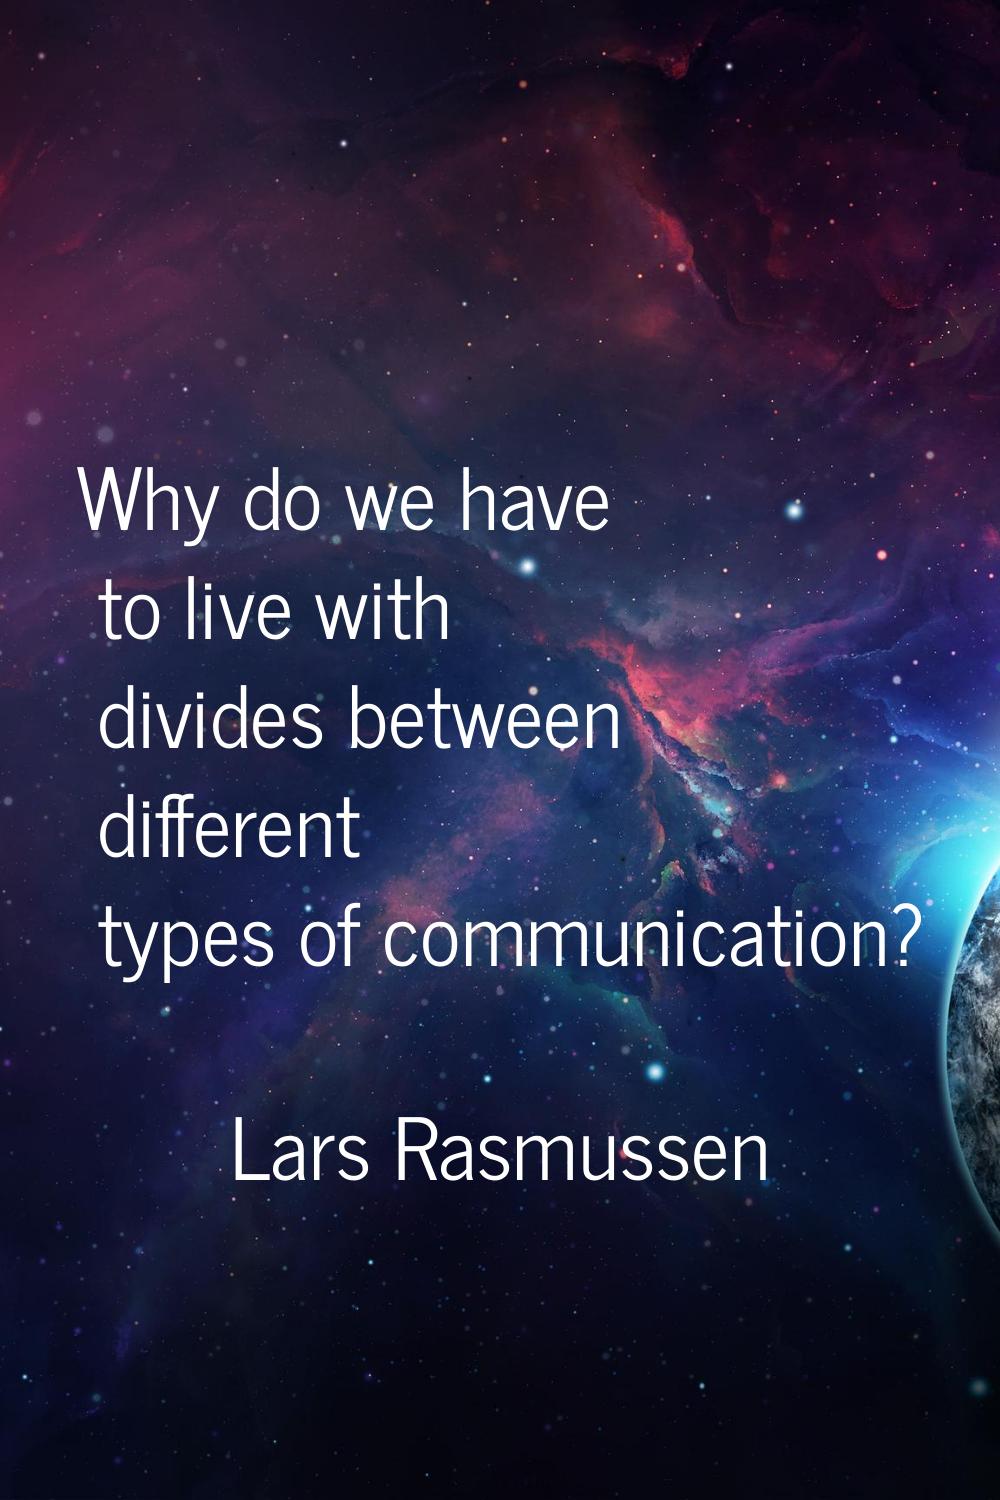 Why do we have to live with divides between different types of communication?